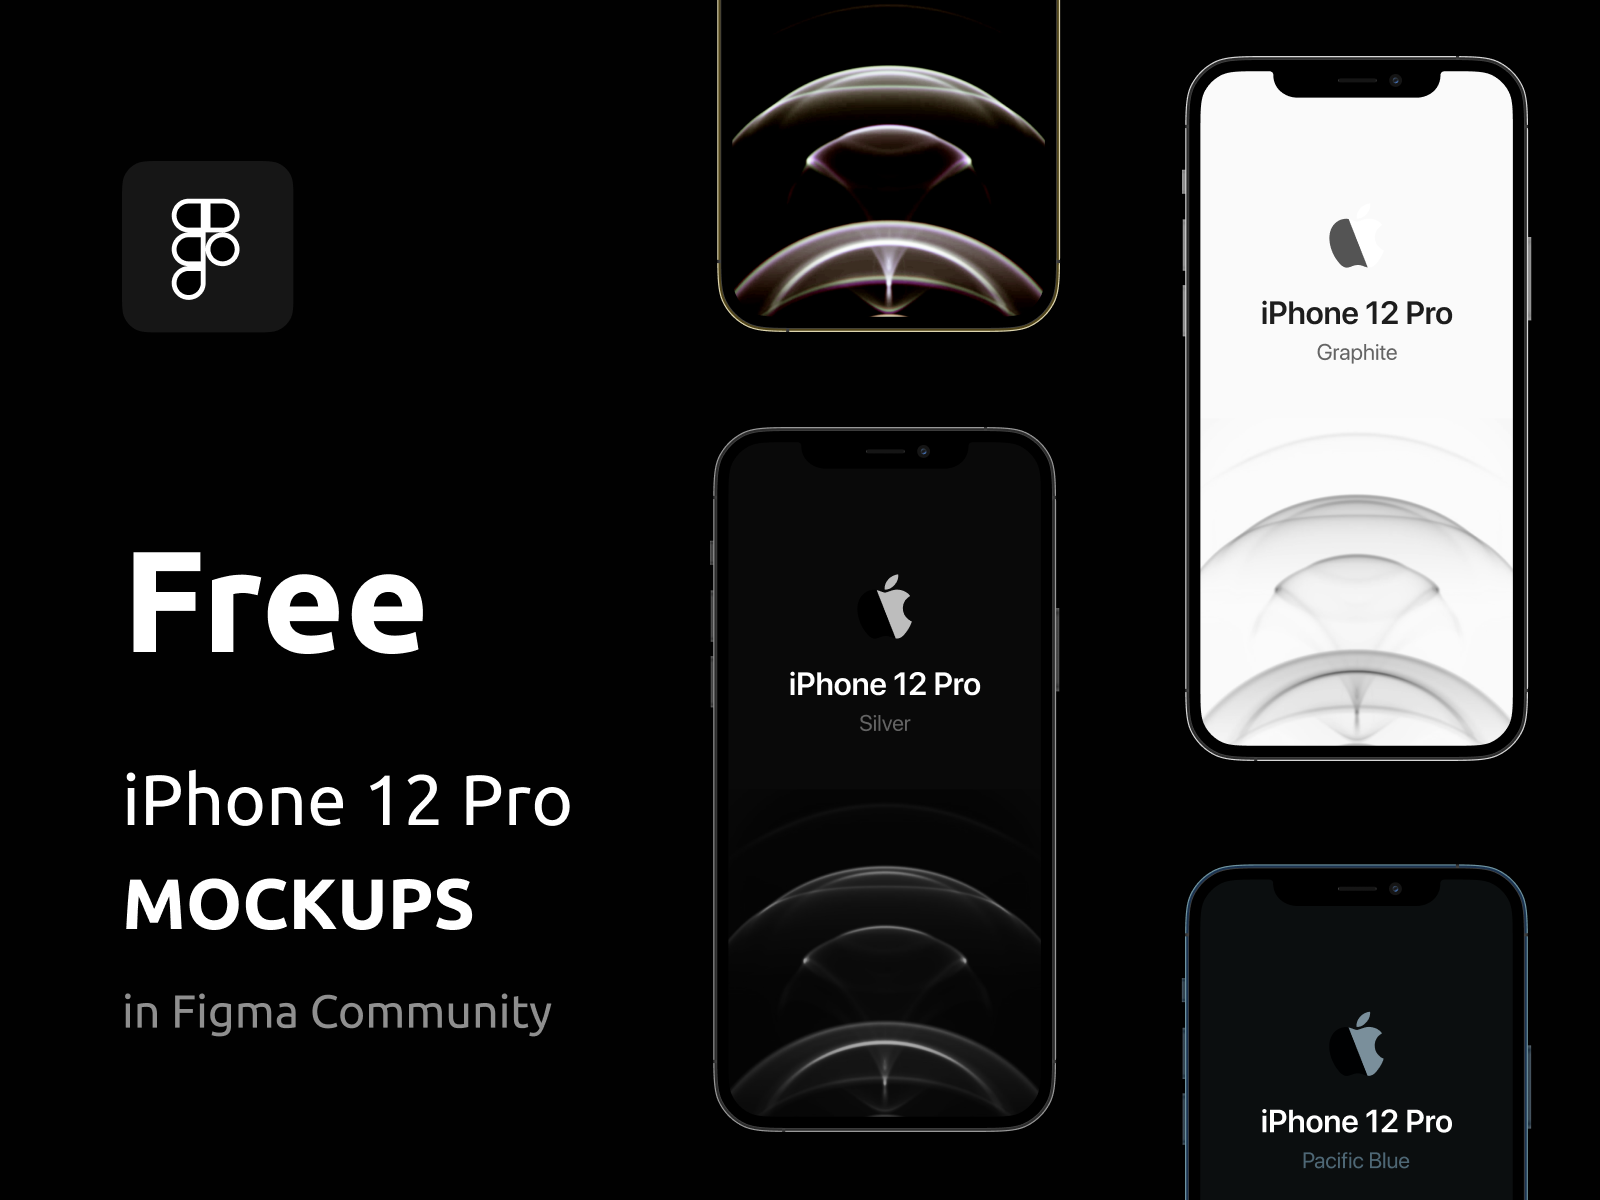 Download iPhone 12 Pro Mockups Free in Figma by Dee Aero on Dribbble